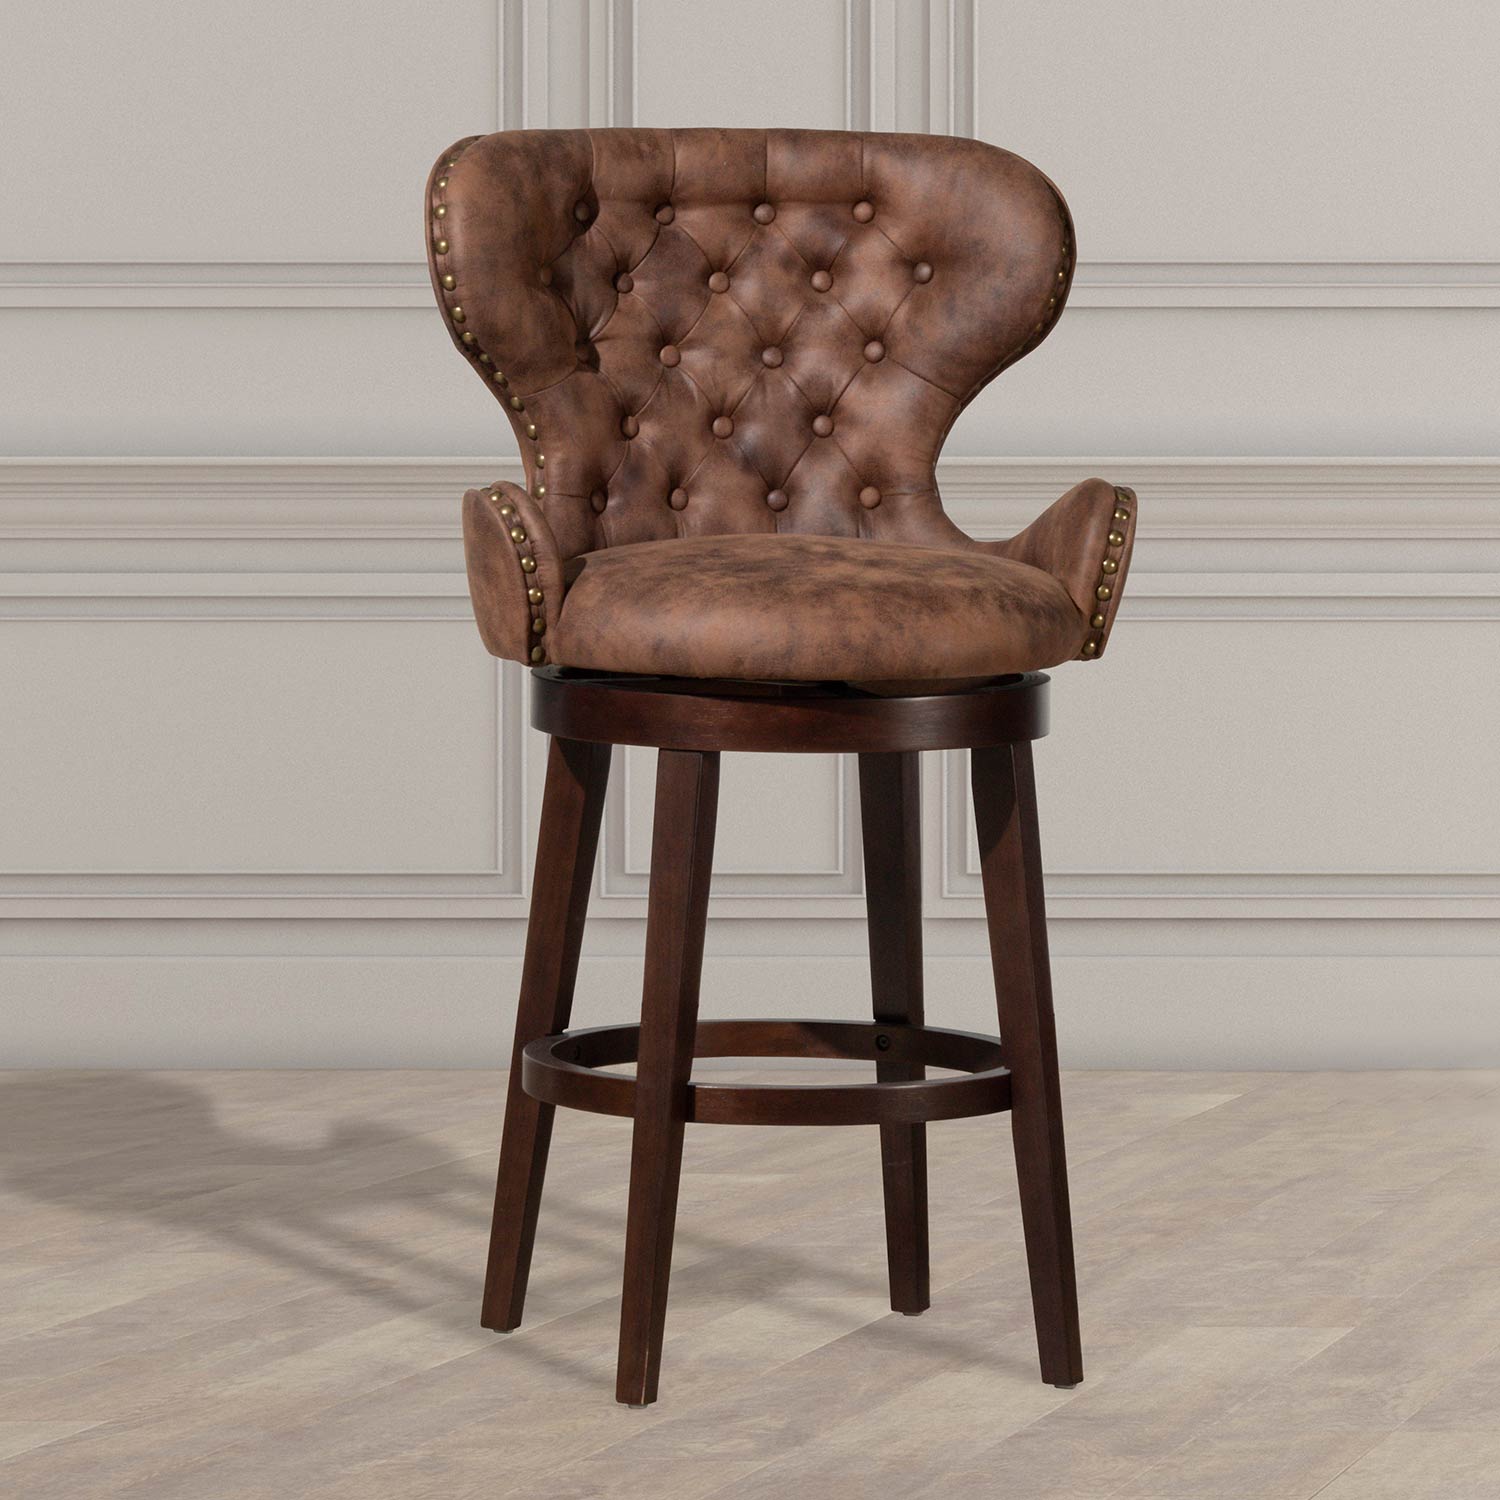 Hillsdale Mid-City Wood and Upholstered Swivel Counter Height Stool - Chocolate